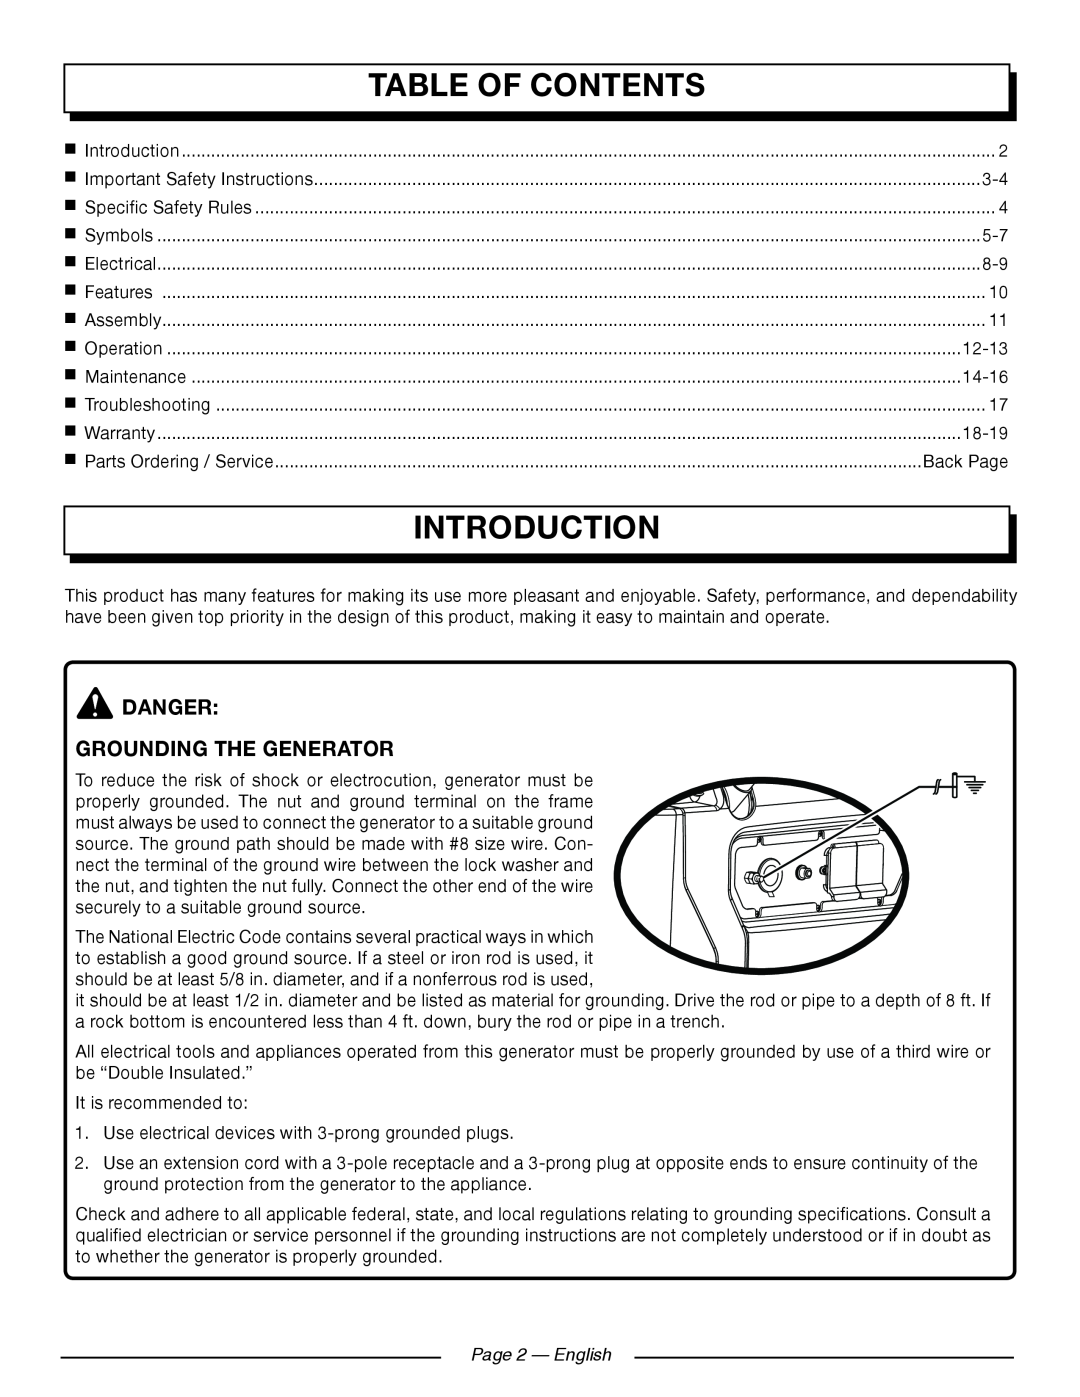 Homelite UT902250 manuel dutilisation Introduction, Table Of Contents, Danger Grounding The Generator, Page 2 — English 